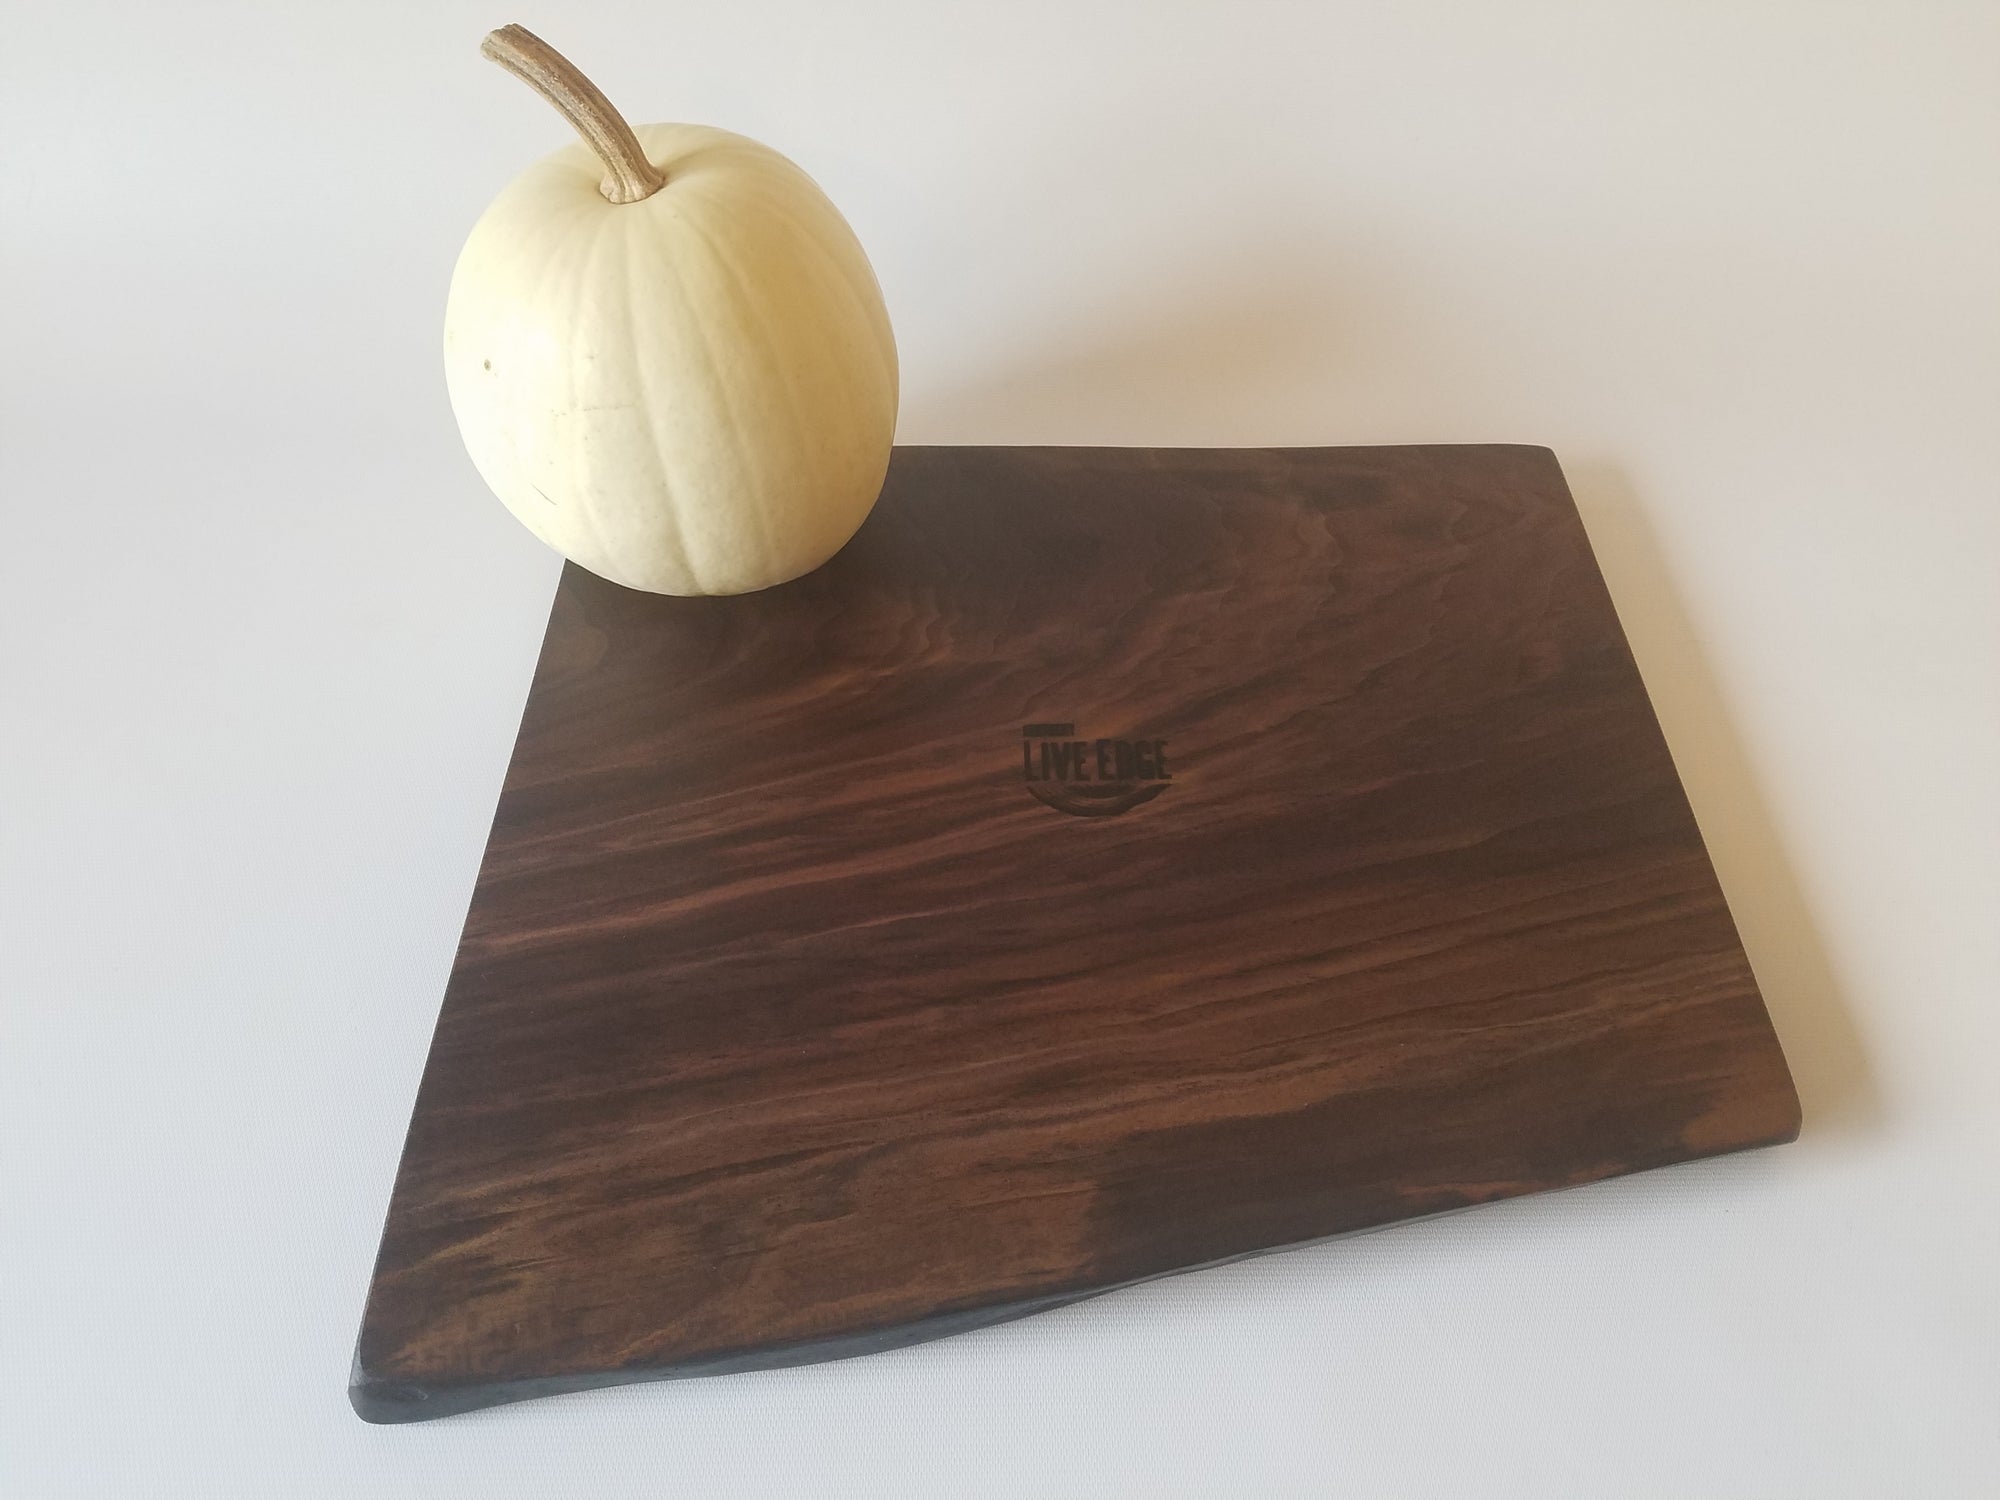 Large Serving Board- Charcuterie Board- Food Server- Black Walnut- Tapas- Bread Board- Cutting Board- Gift For Chef- Cooking- Hosting Gift